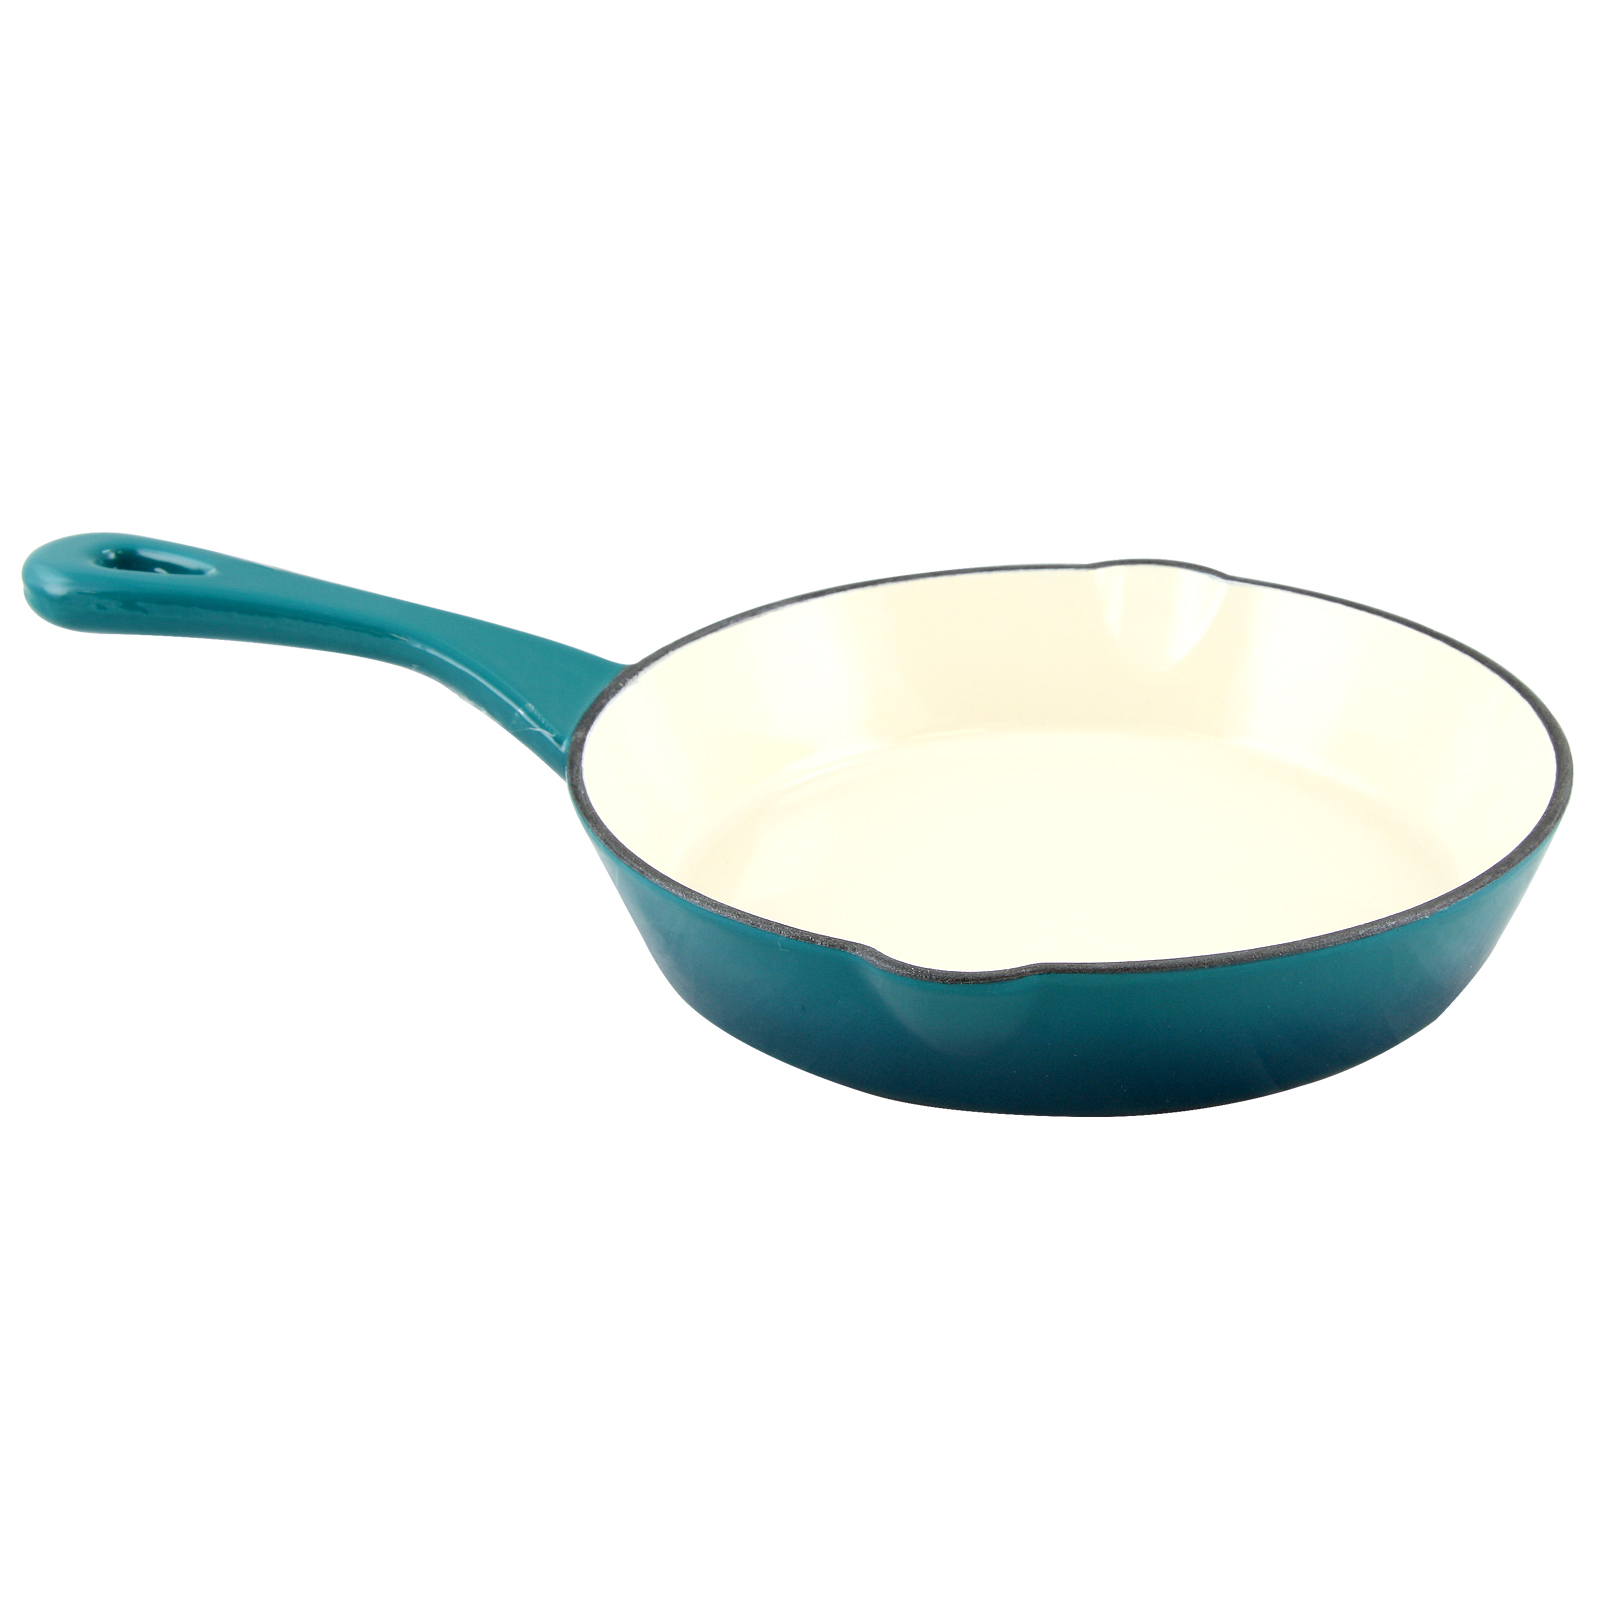 Crock-Pot. Artisan Enameled 8" Round Cast Iron Skillet in Teal Ombre